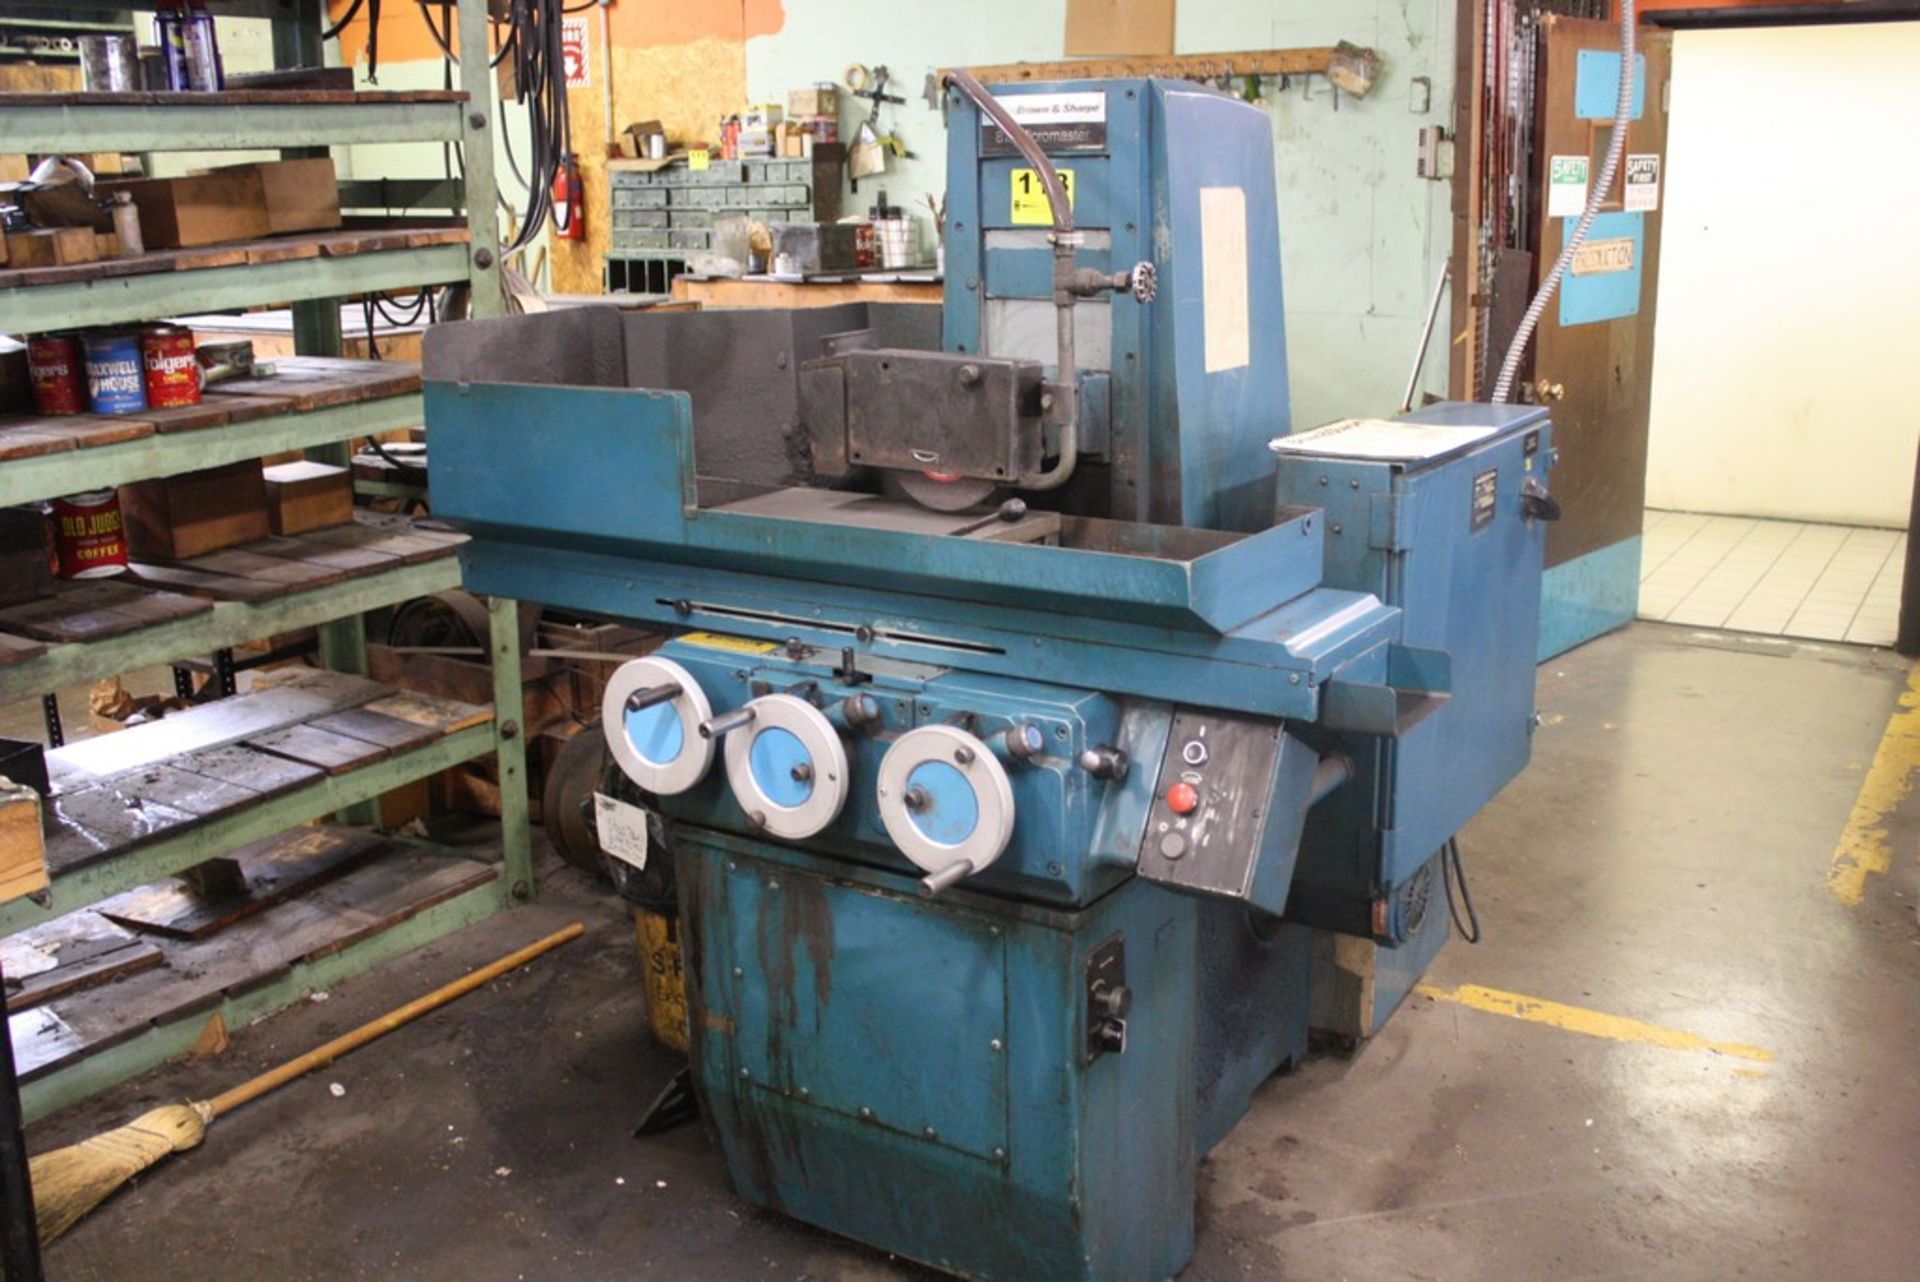 BROWN & SHARPE 8”X18: MODEL 818 MICROMASTER HYDRAULIC SURFACE GRINDER, S/N 523-8186-7740, WITH